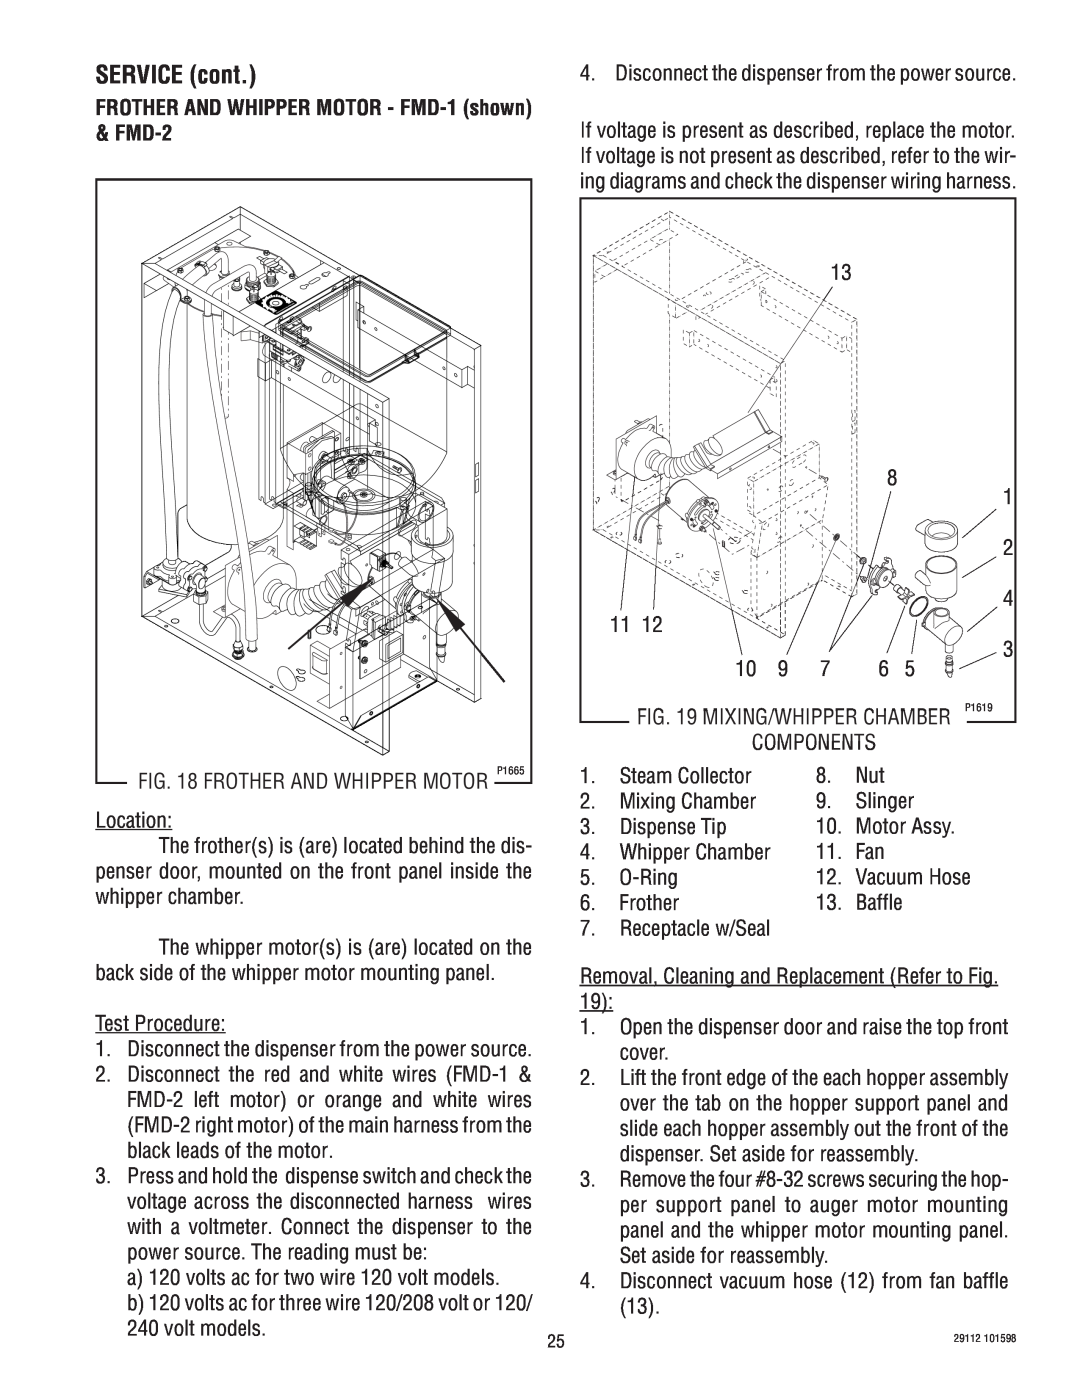 Bunn FMD-1 FMD-2 service manual SERVICE cont, penser door, mounted on the front panel inside the, Baffle 